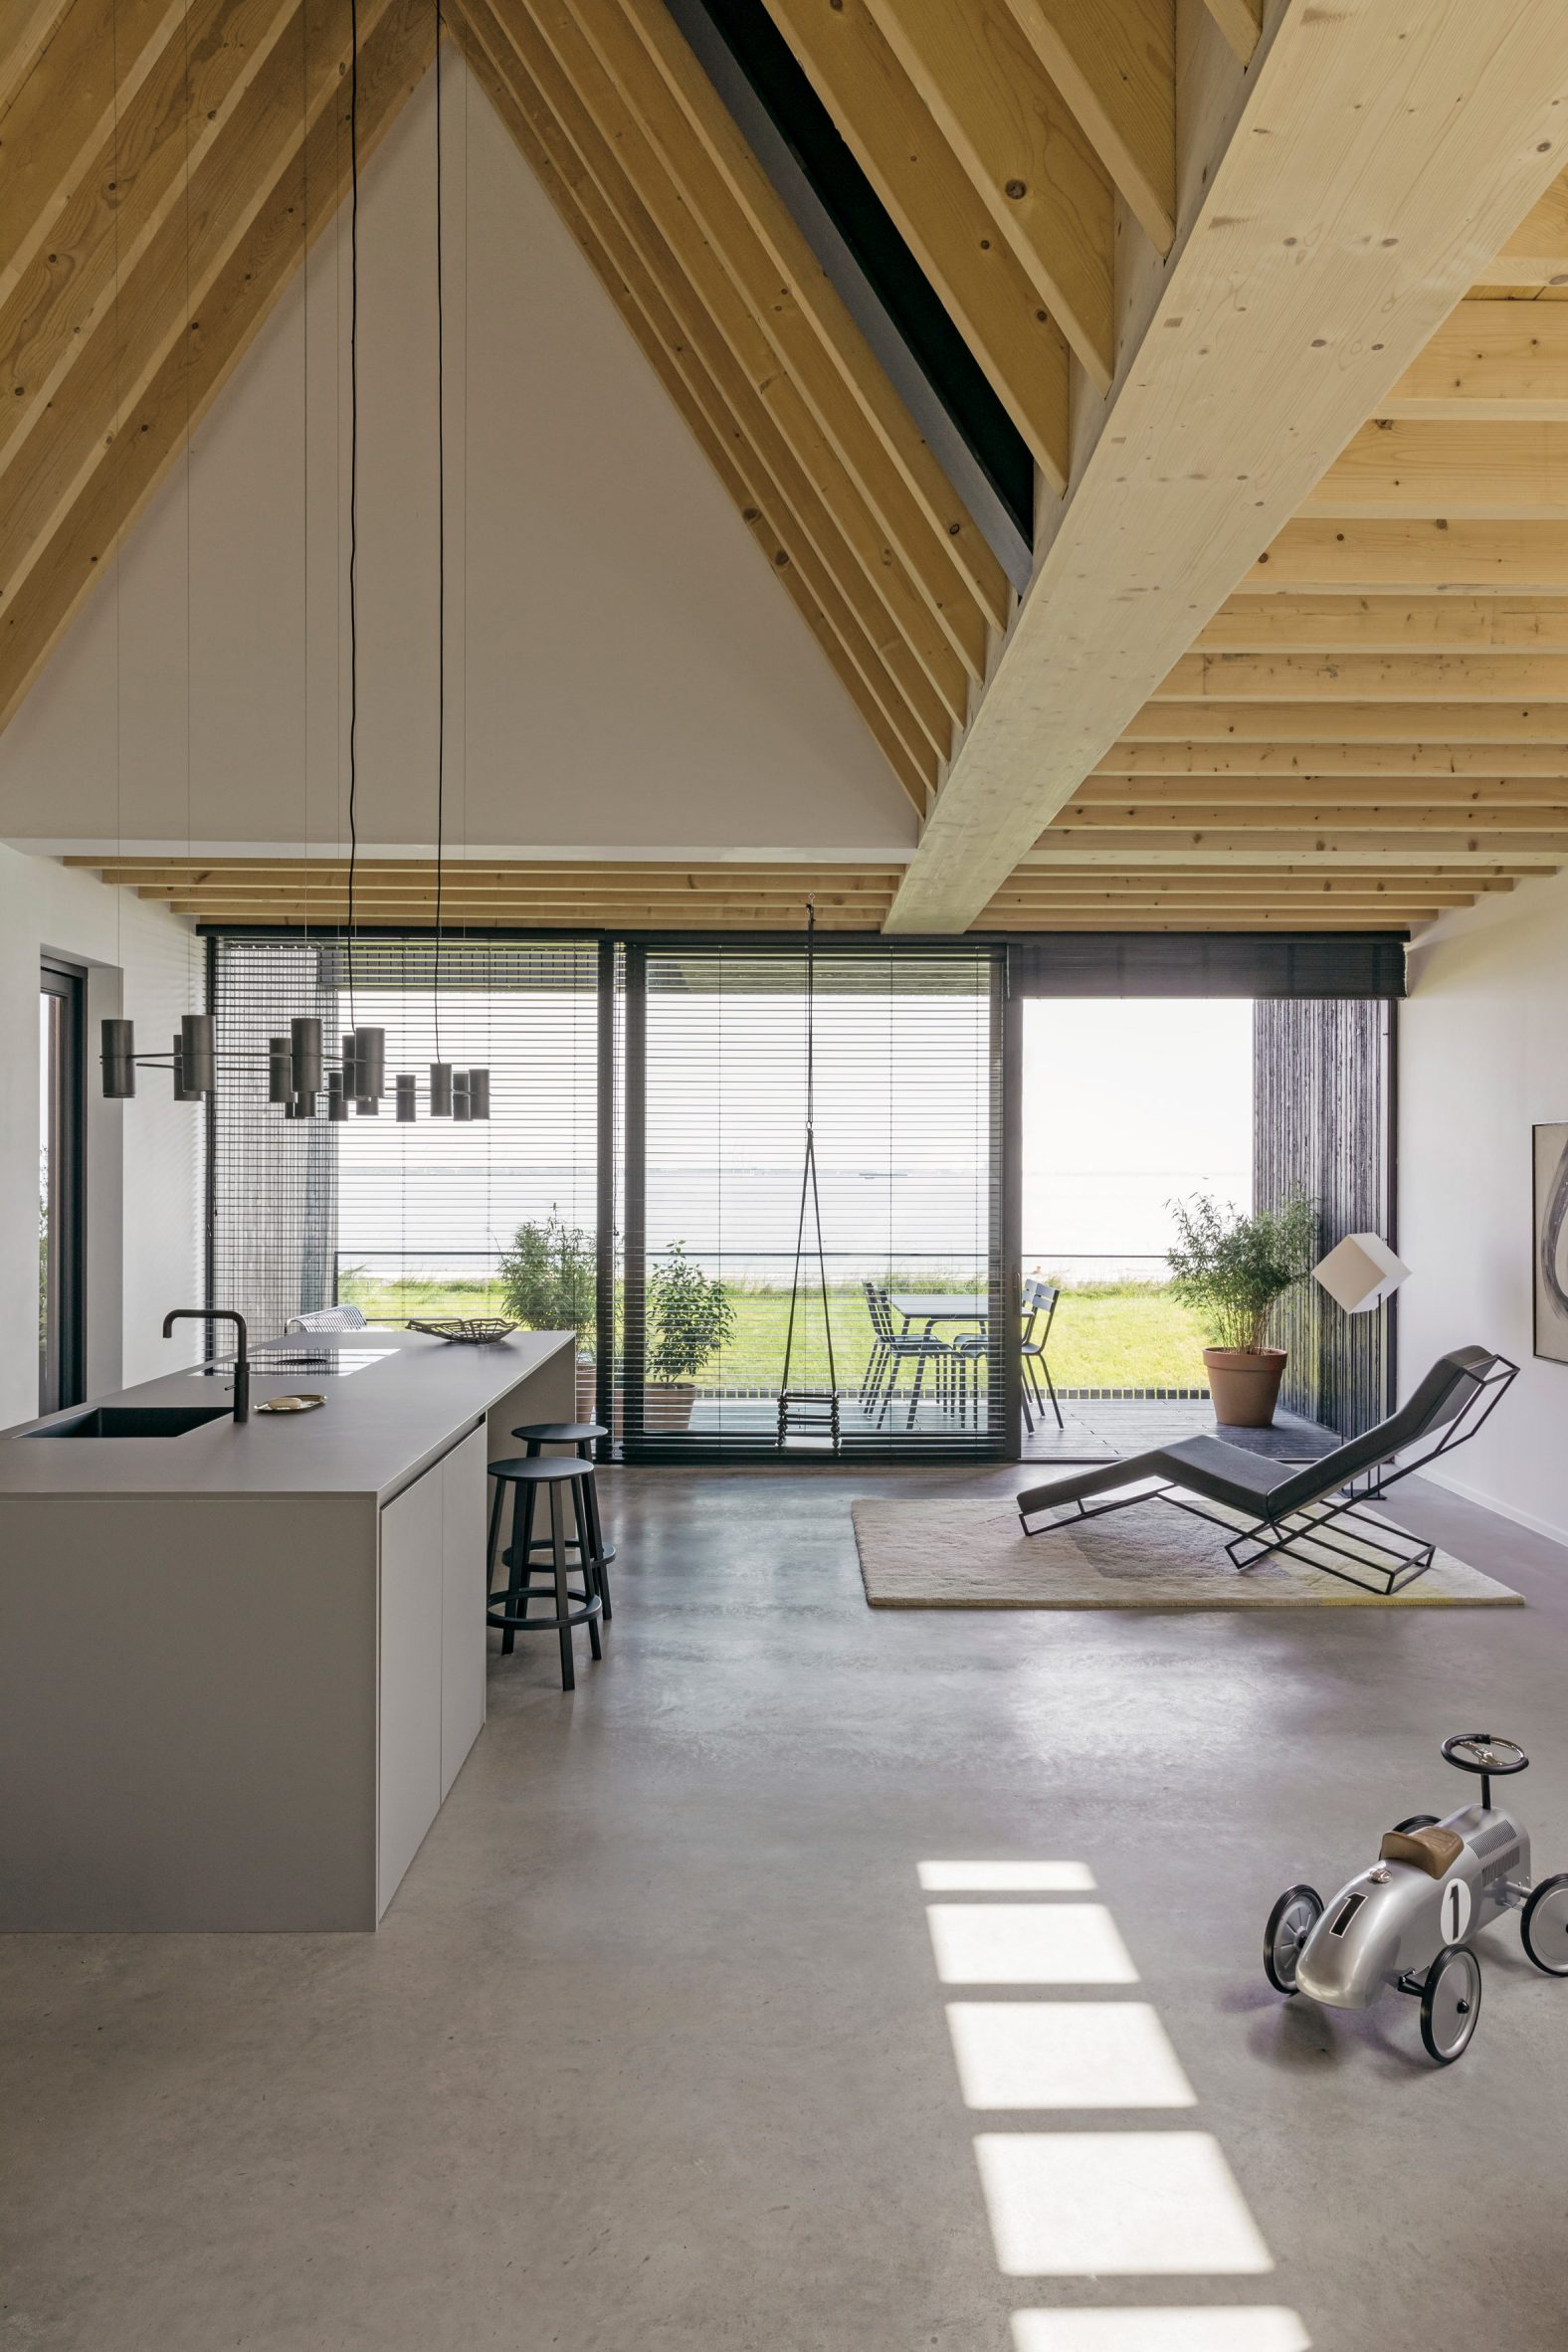 House With a View has wood lined ceilings